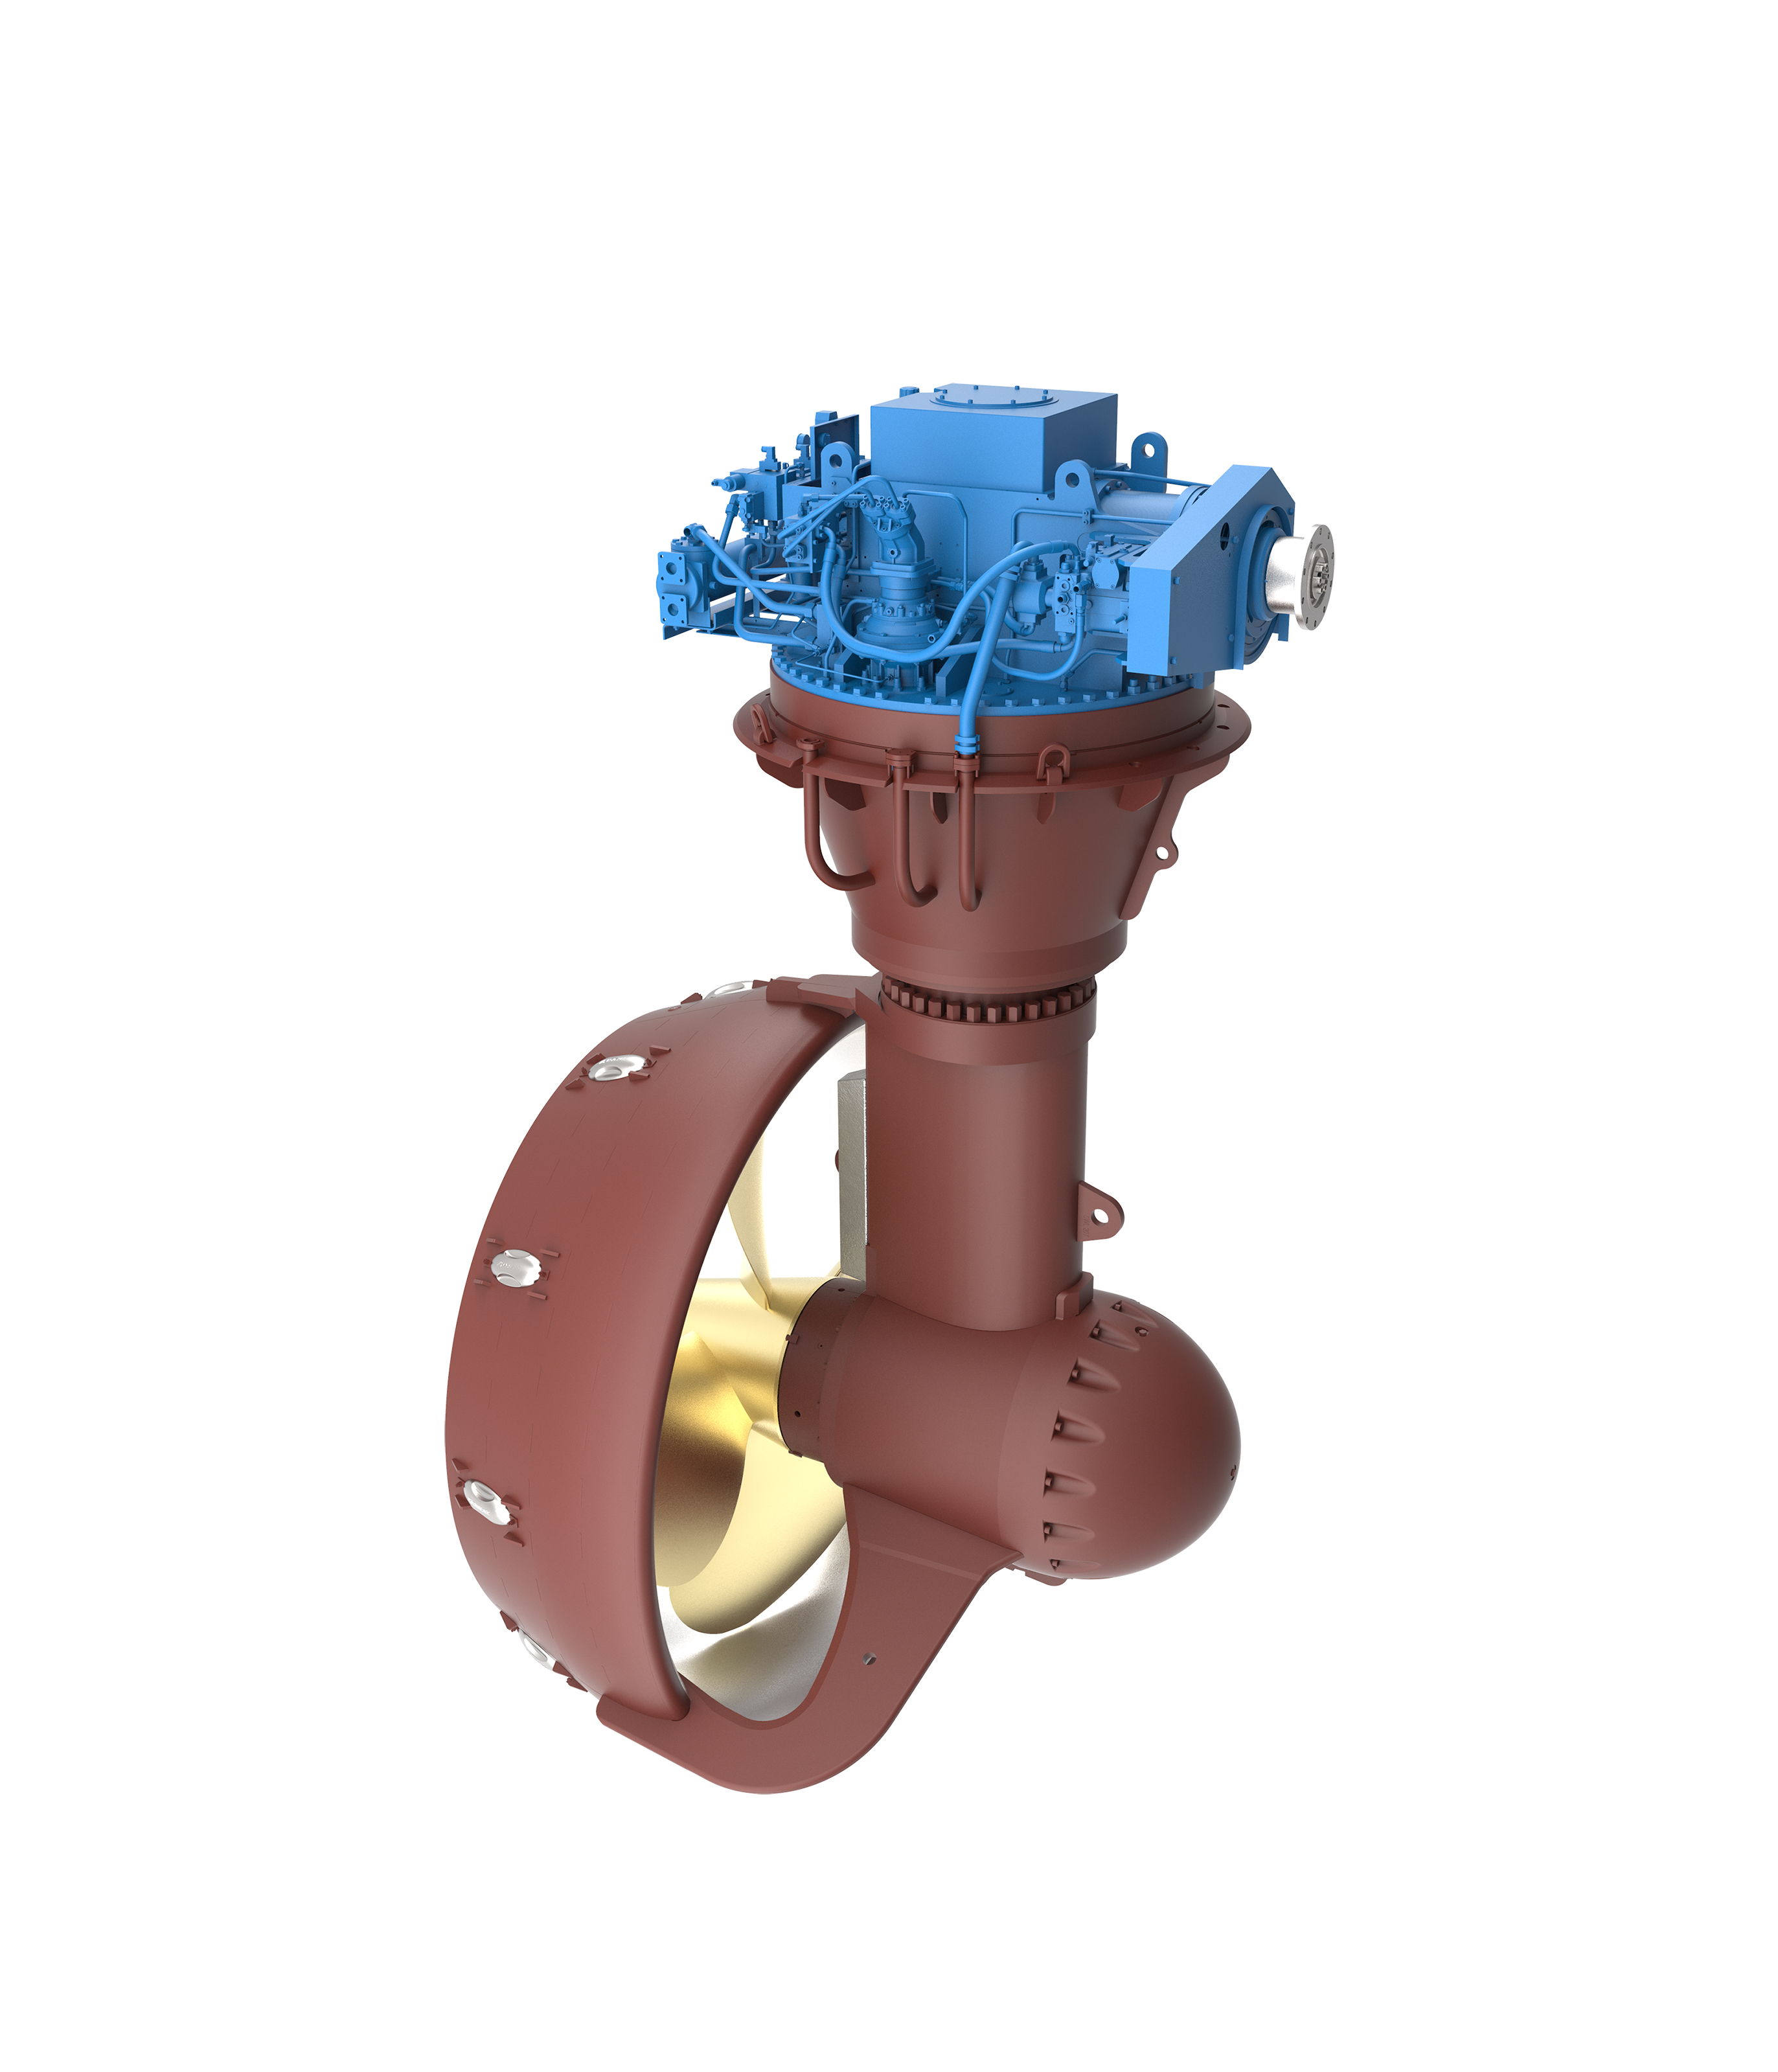 New retractable azimuth thruster series that saves space and delivers more  power - Kongsberg Maritime